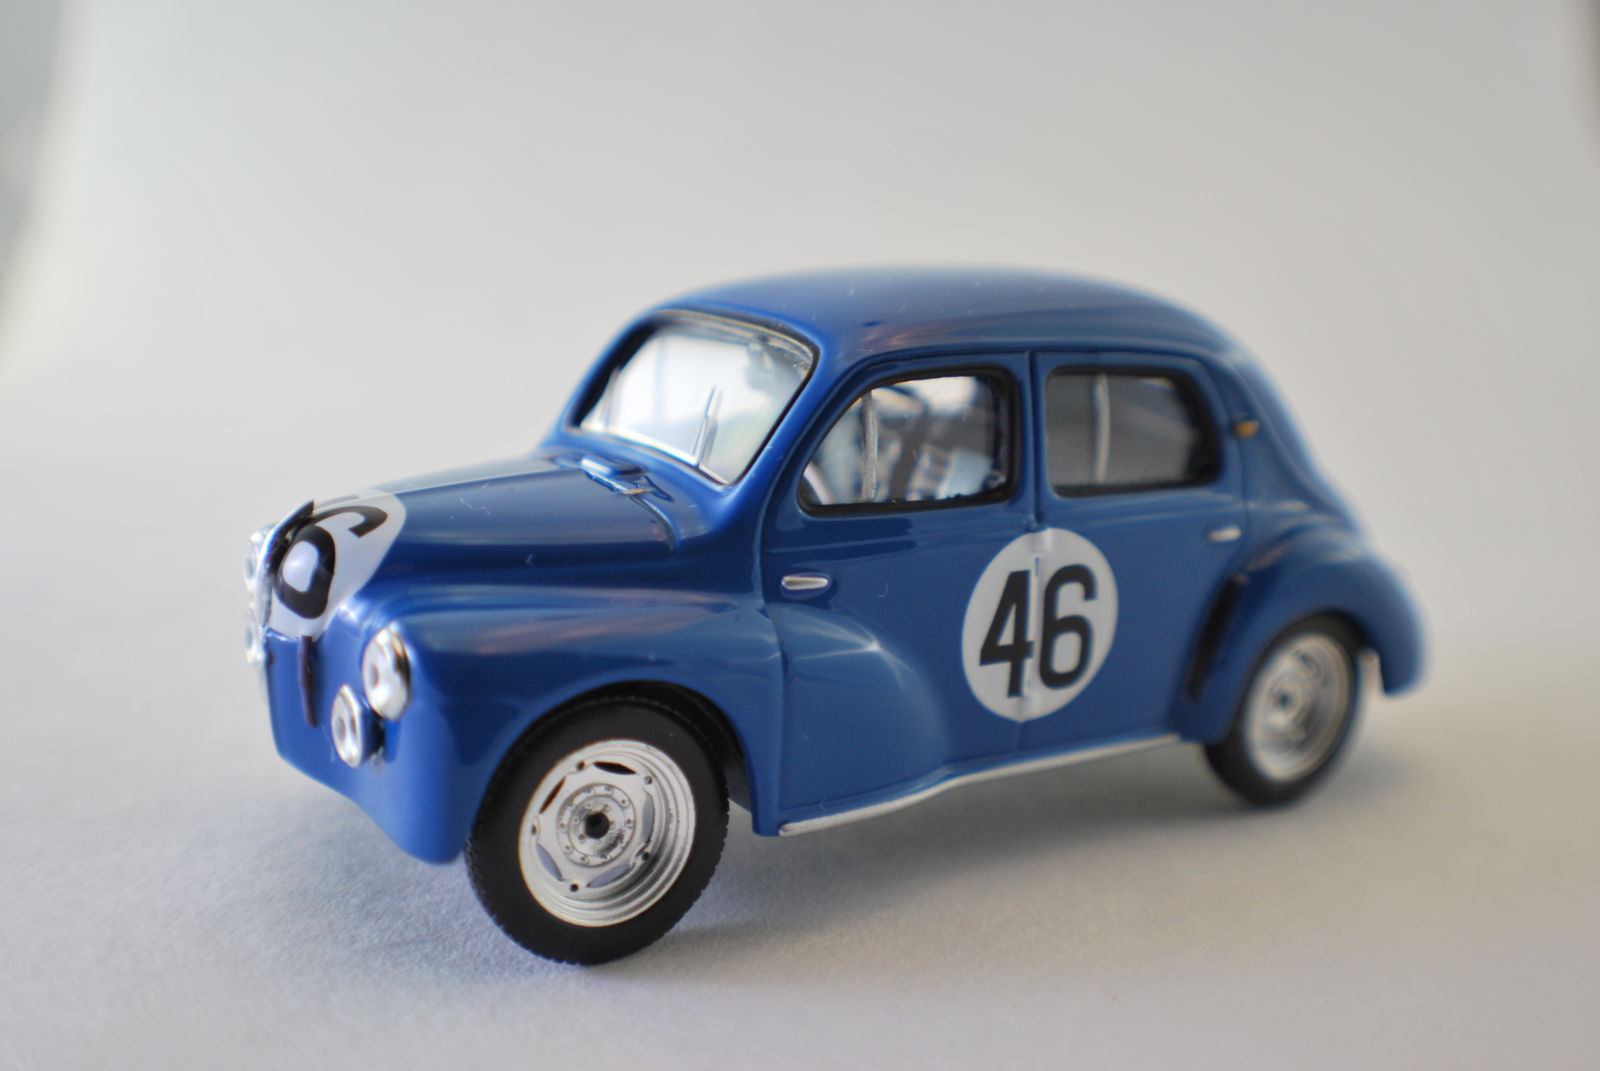 Illustration for article titled French Friday: RENAULT 4CV 1950 Le Mans class winner